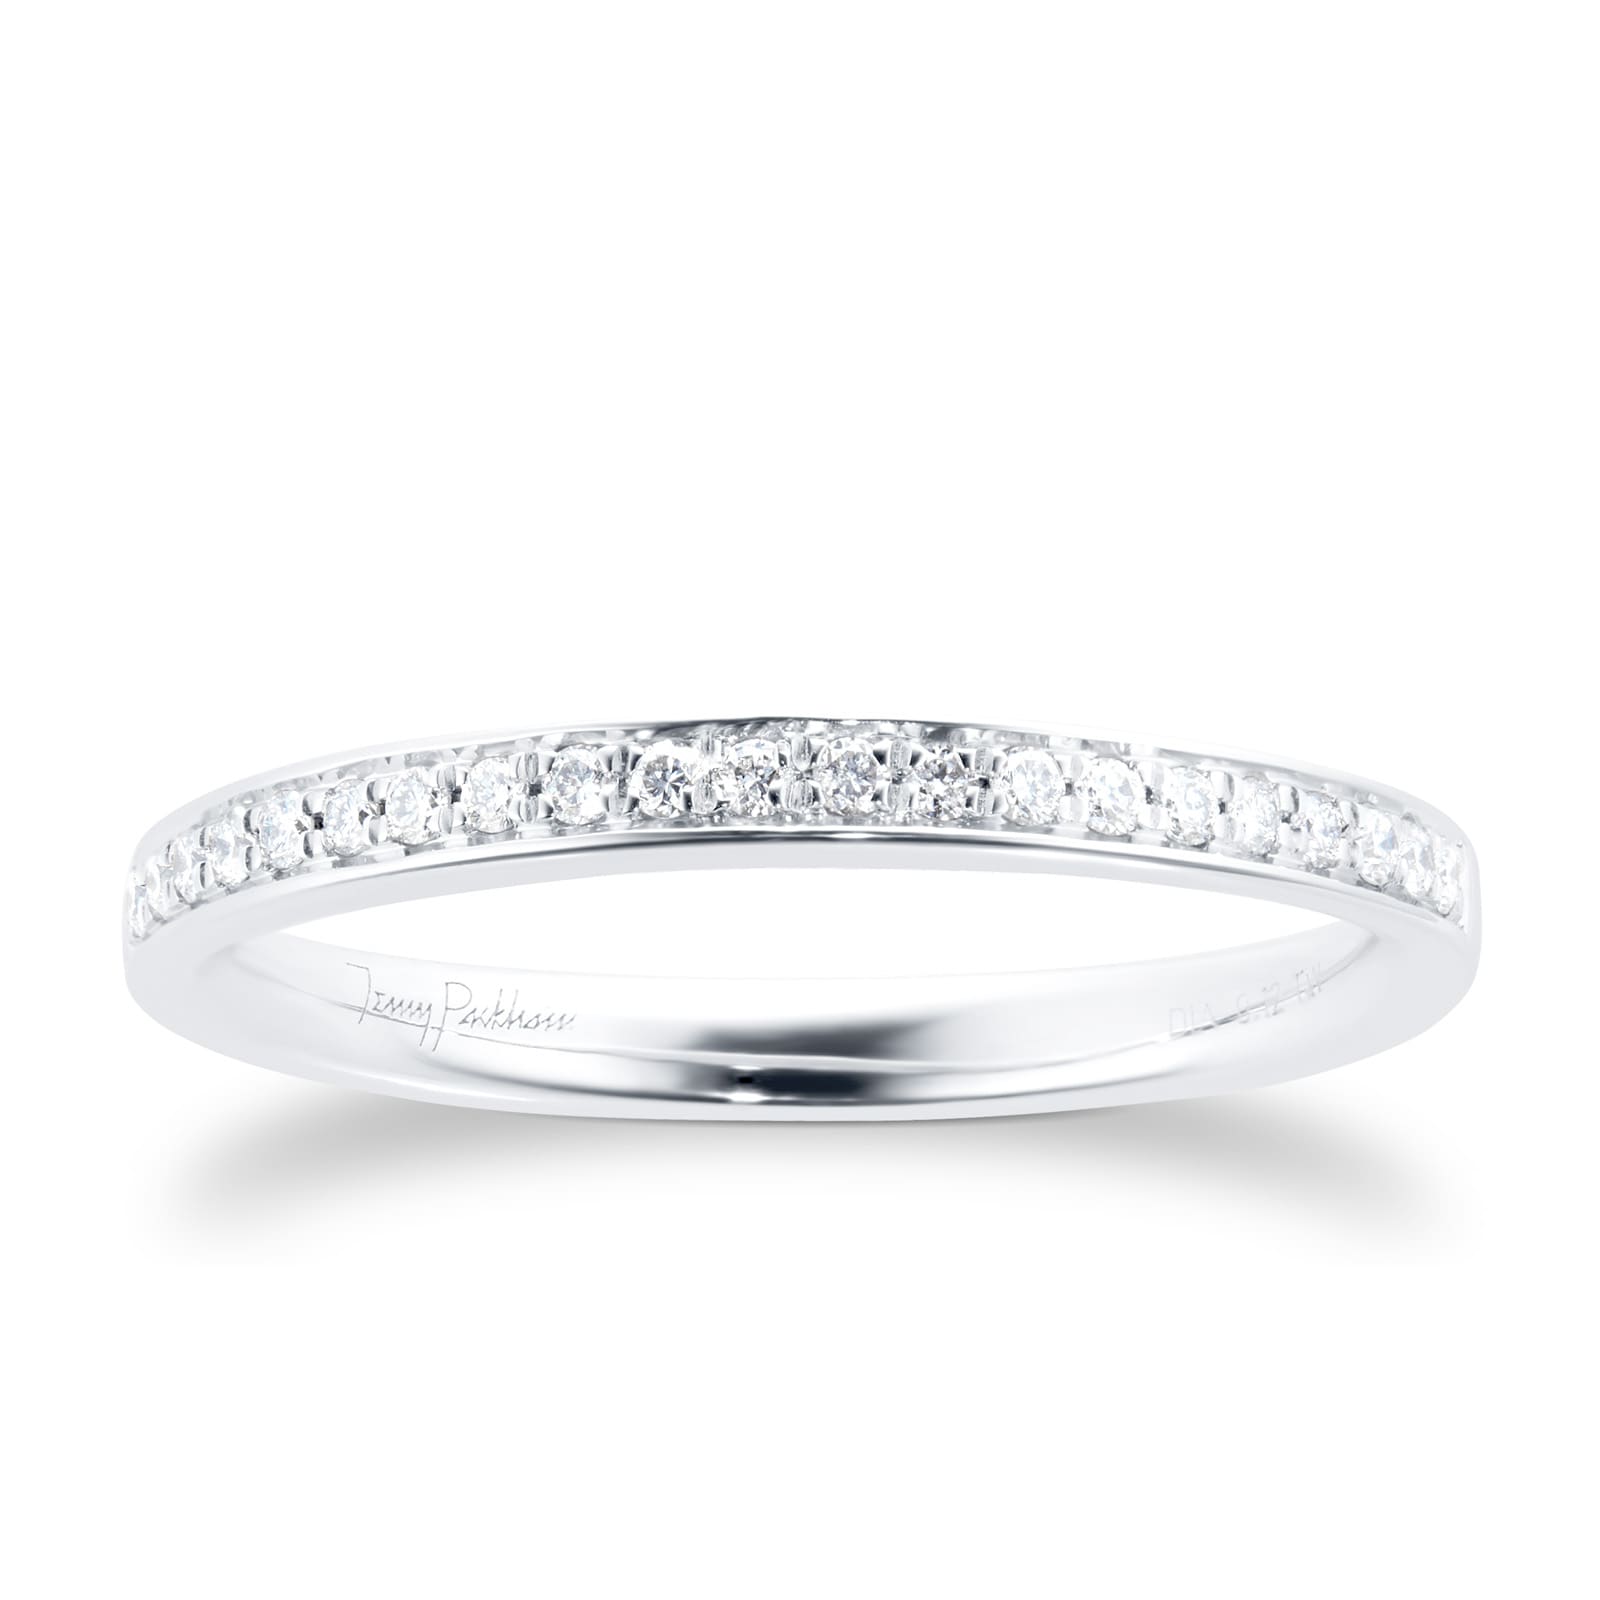 Jenny Packham Brilliant Cut 0.23 Carat Total Weight Contour Wedding Ring In  18 Carat White Gold - Ring Size M RA7956 | Goldsmiths